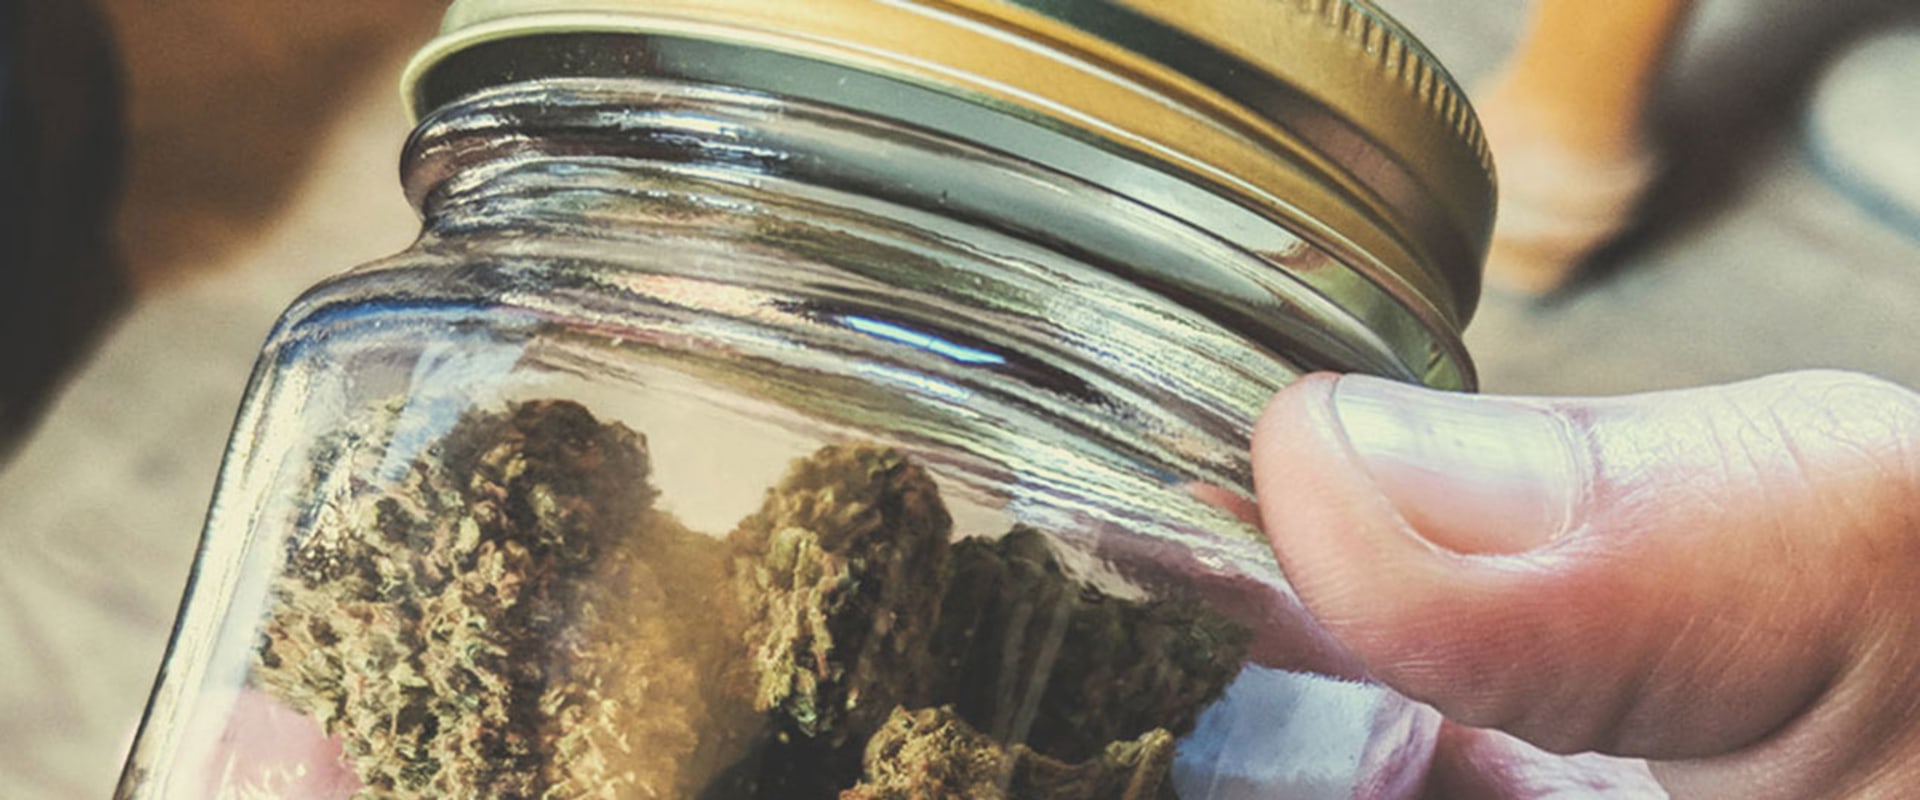 Best Practices for Consuming Cannabis Responsibly